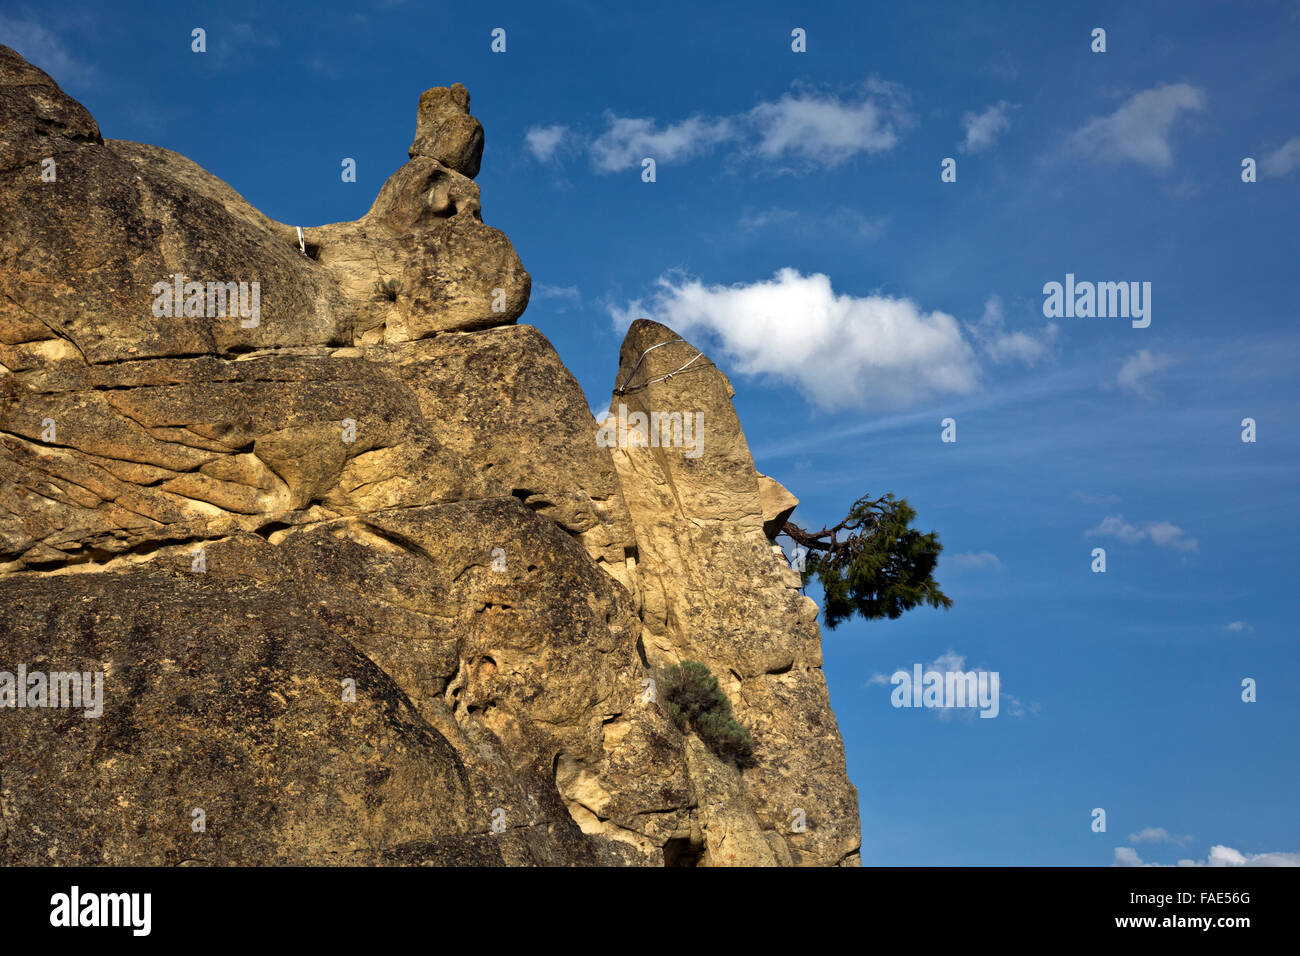 WASHINGTON - Tree growing off the side of a sandstone spire at Peshastin Pinnacles State Park, a popular rock climbing area. Stock Photo